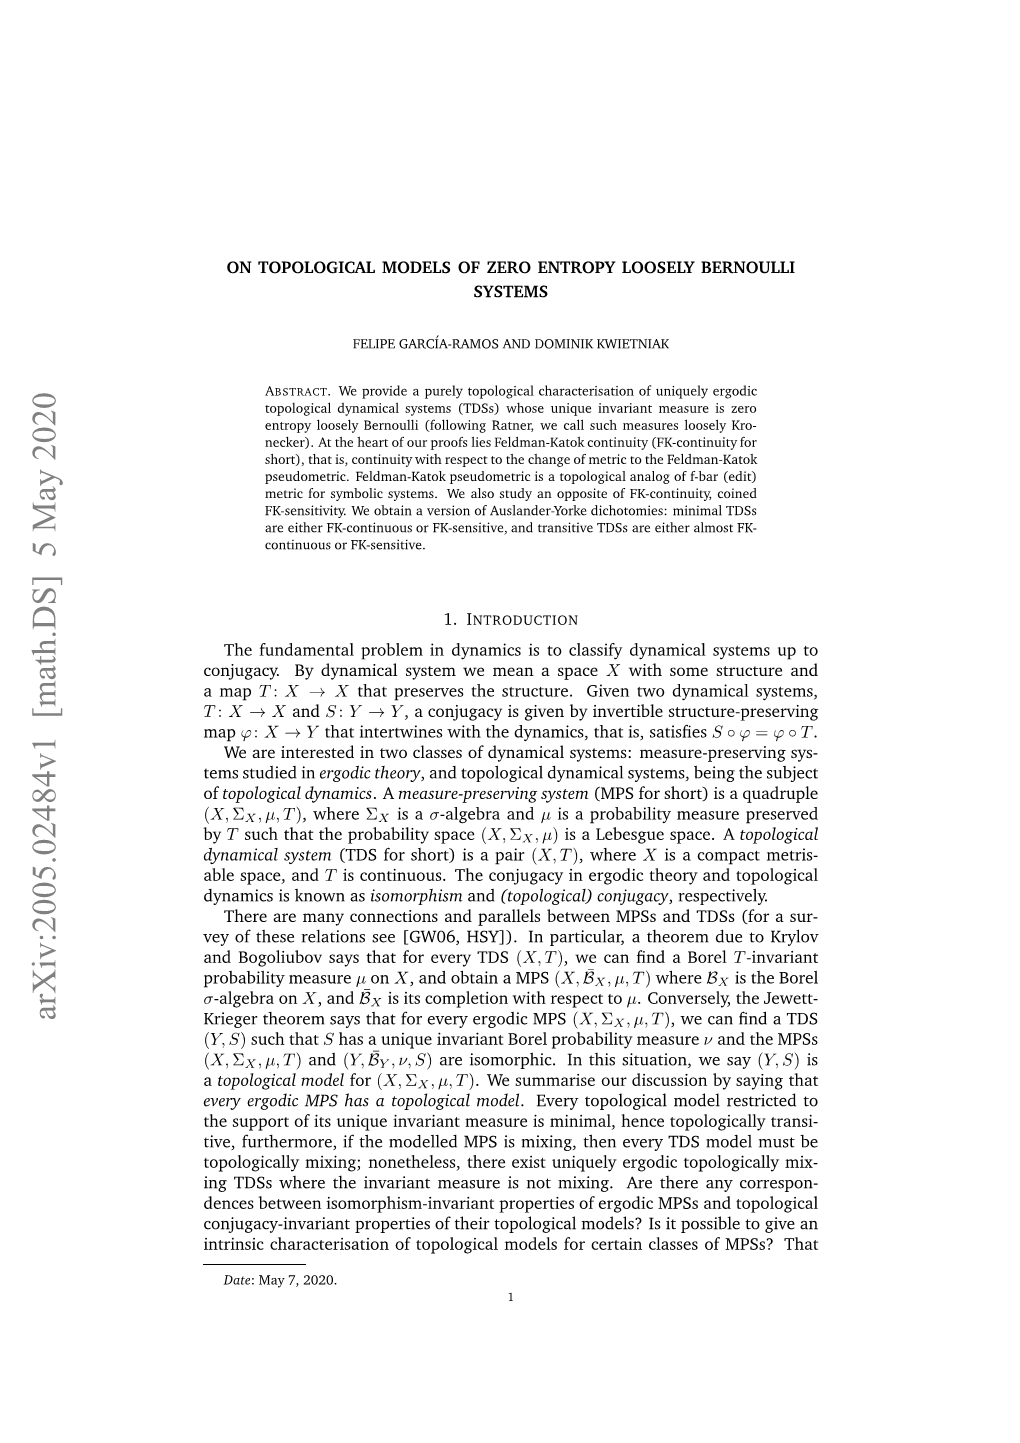 On Topological Models of Zero Entropy Loosely Bernoulli Systems 3